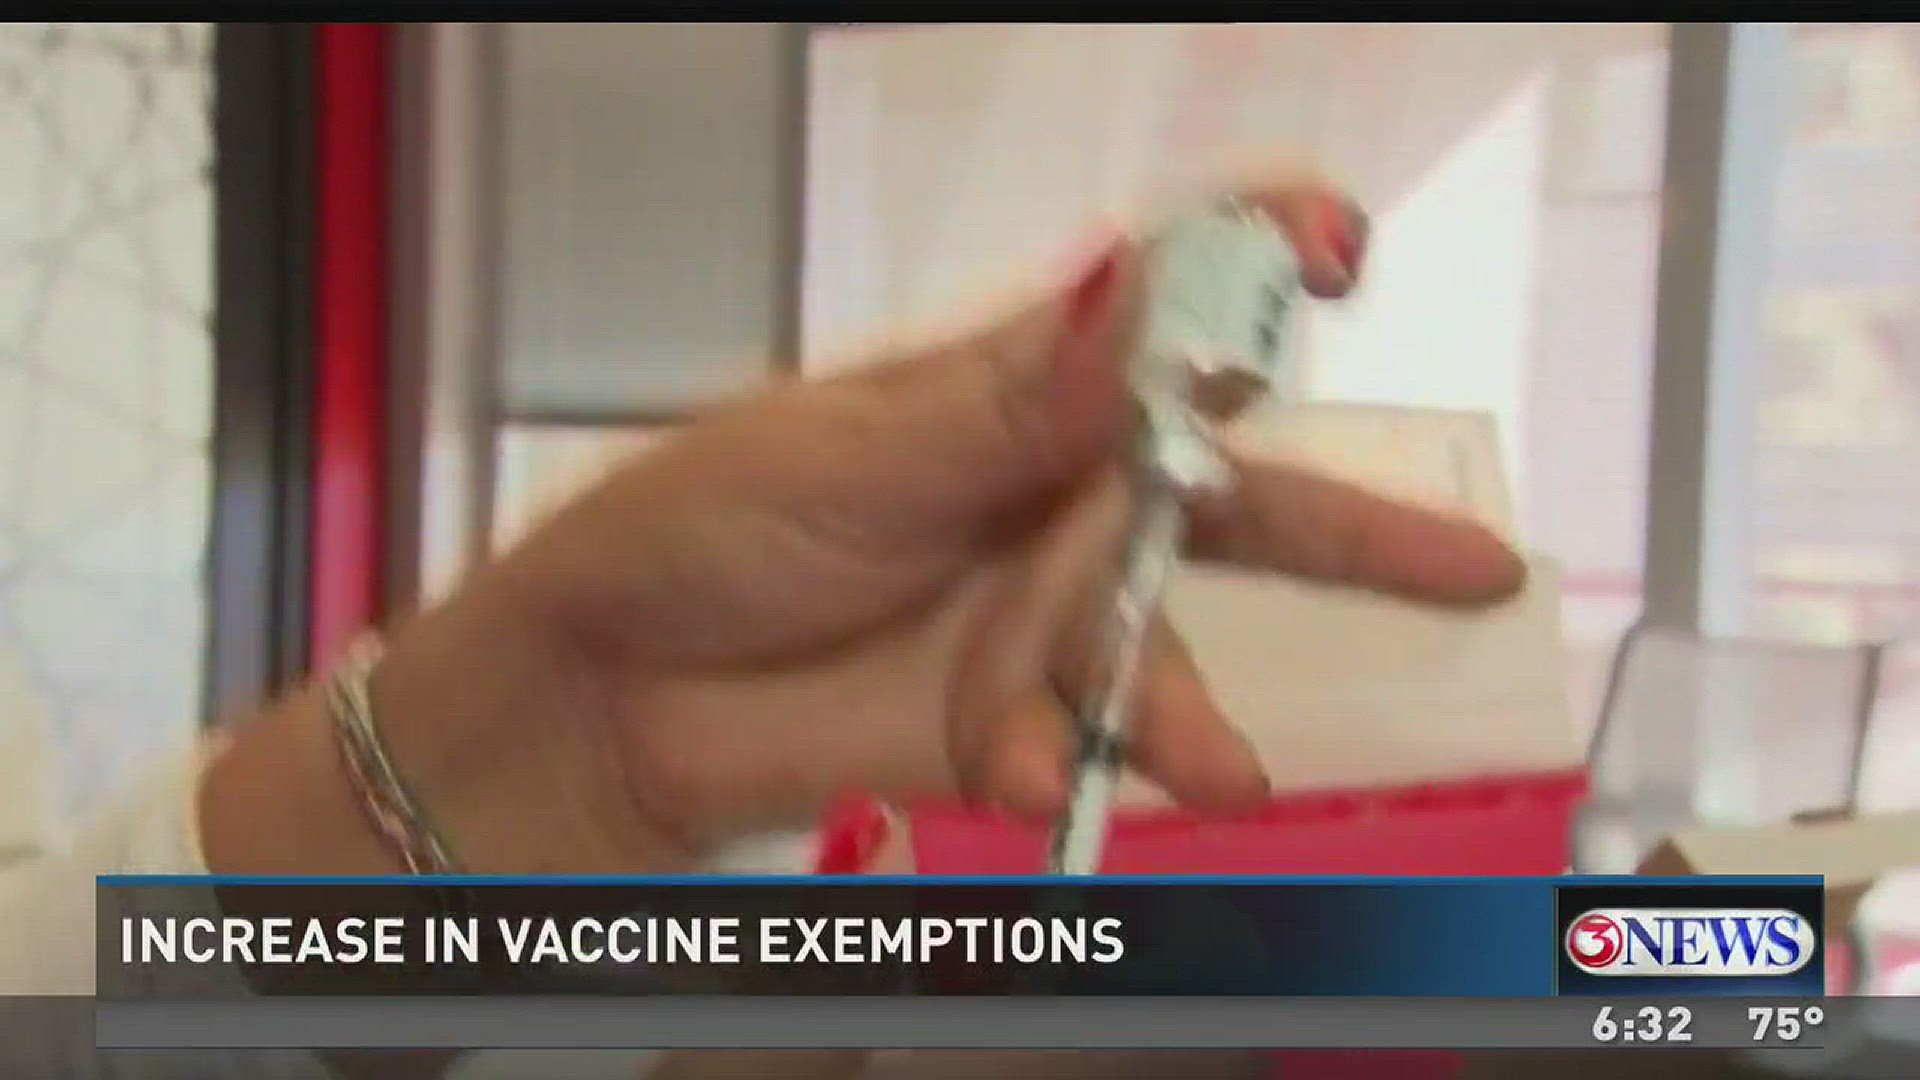 A growing number of parents in the Lone Star State are choosing not to vaccinate their children despite warnings from doctors.